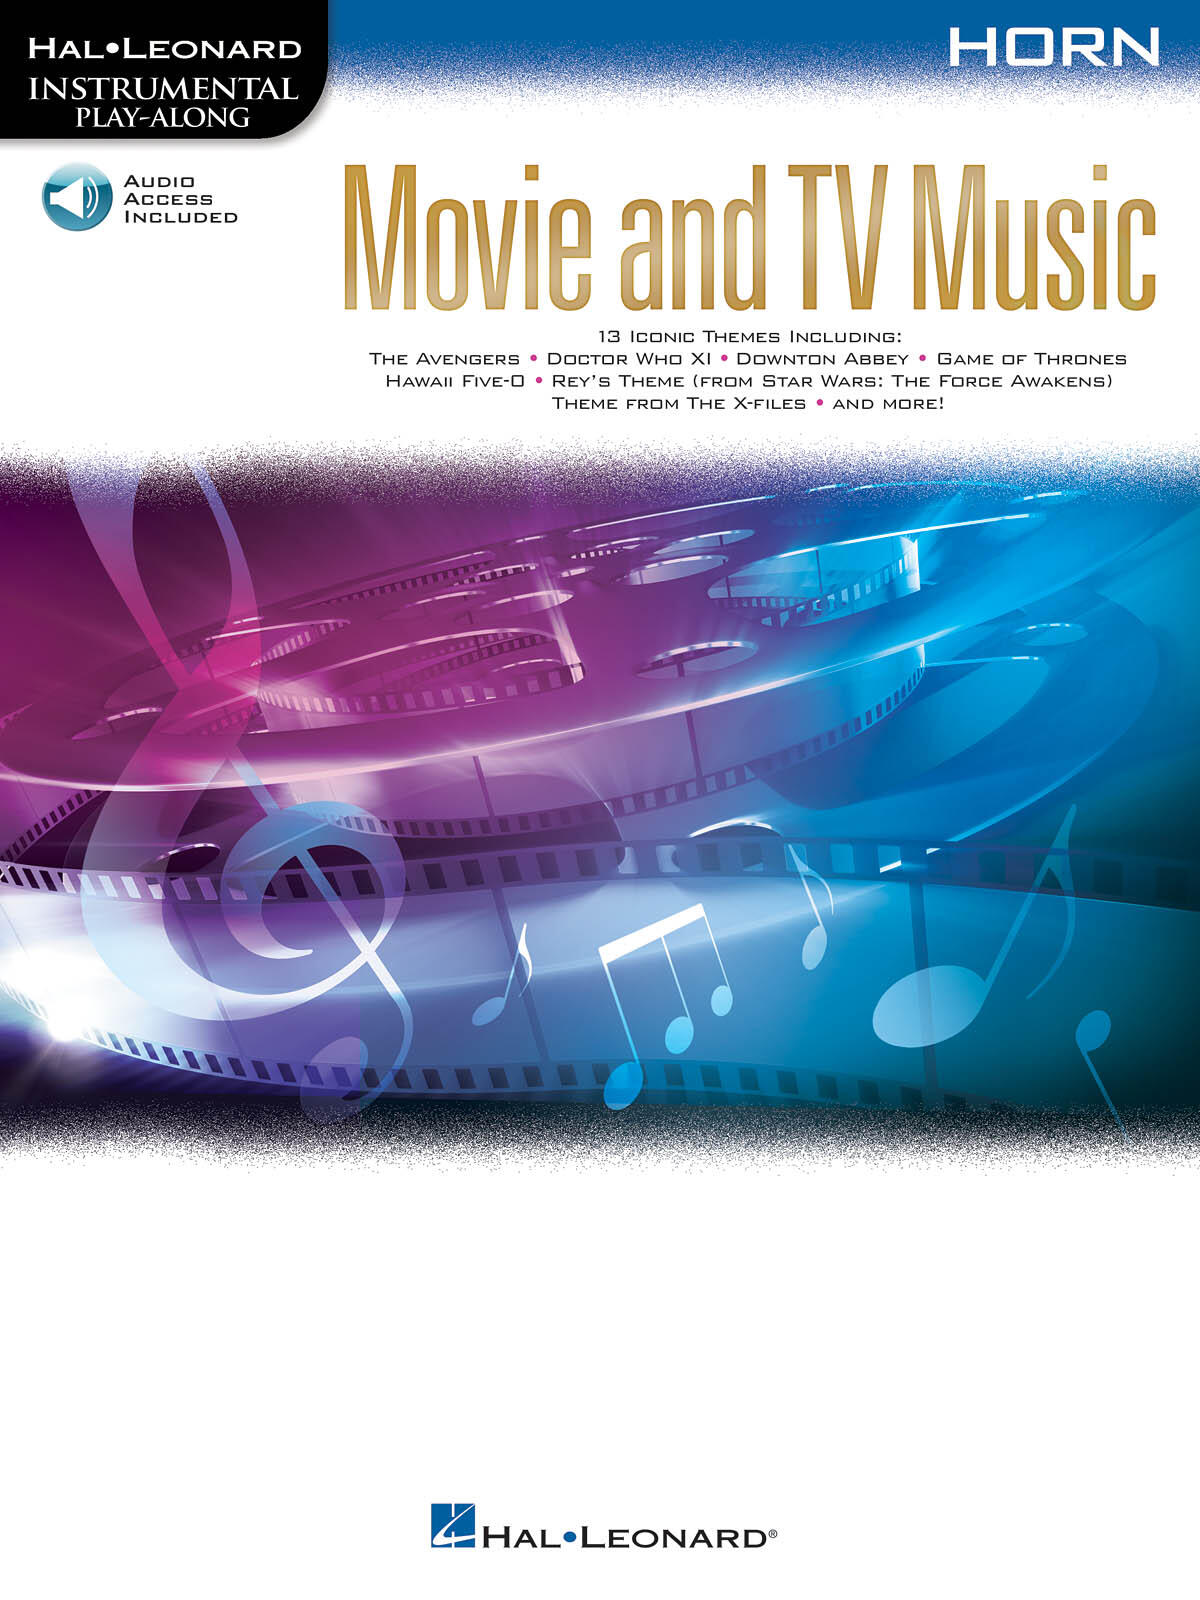 Movie and TV Music - Horn Instrumental Play-Along : photo 1